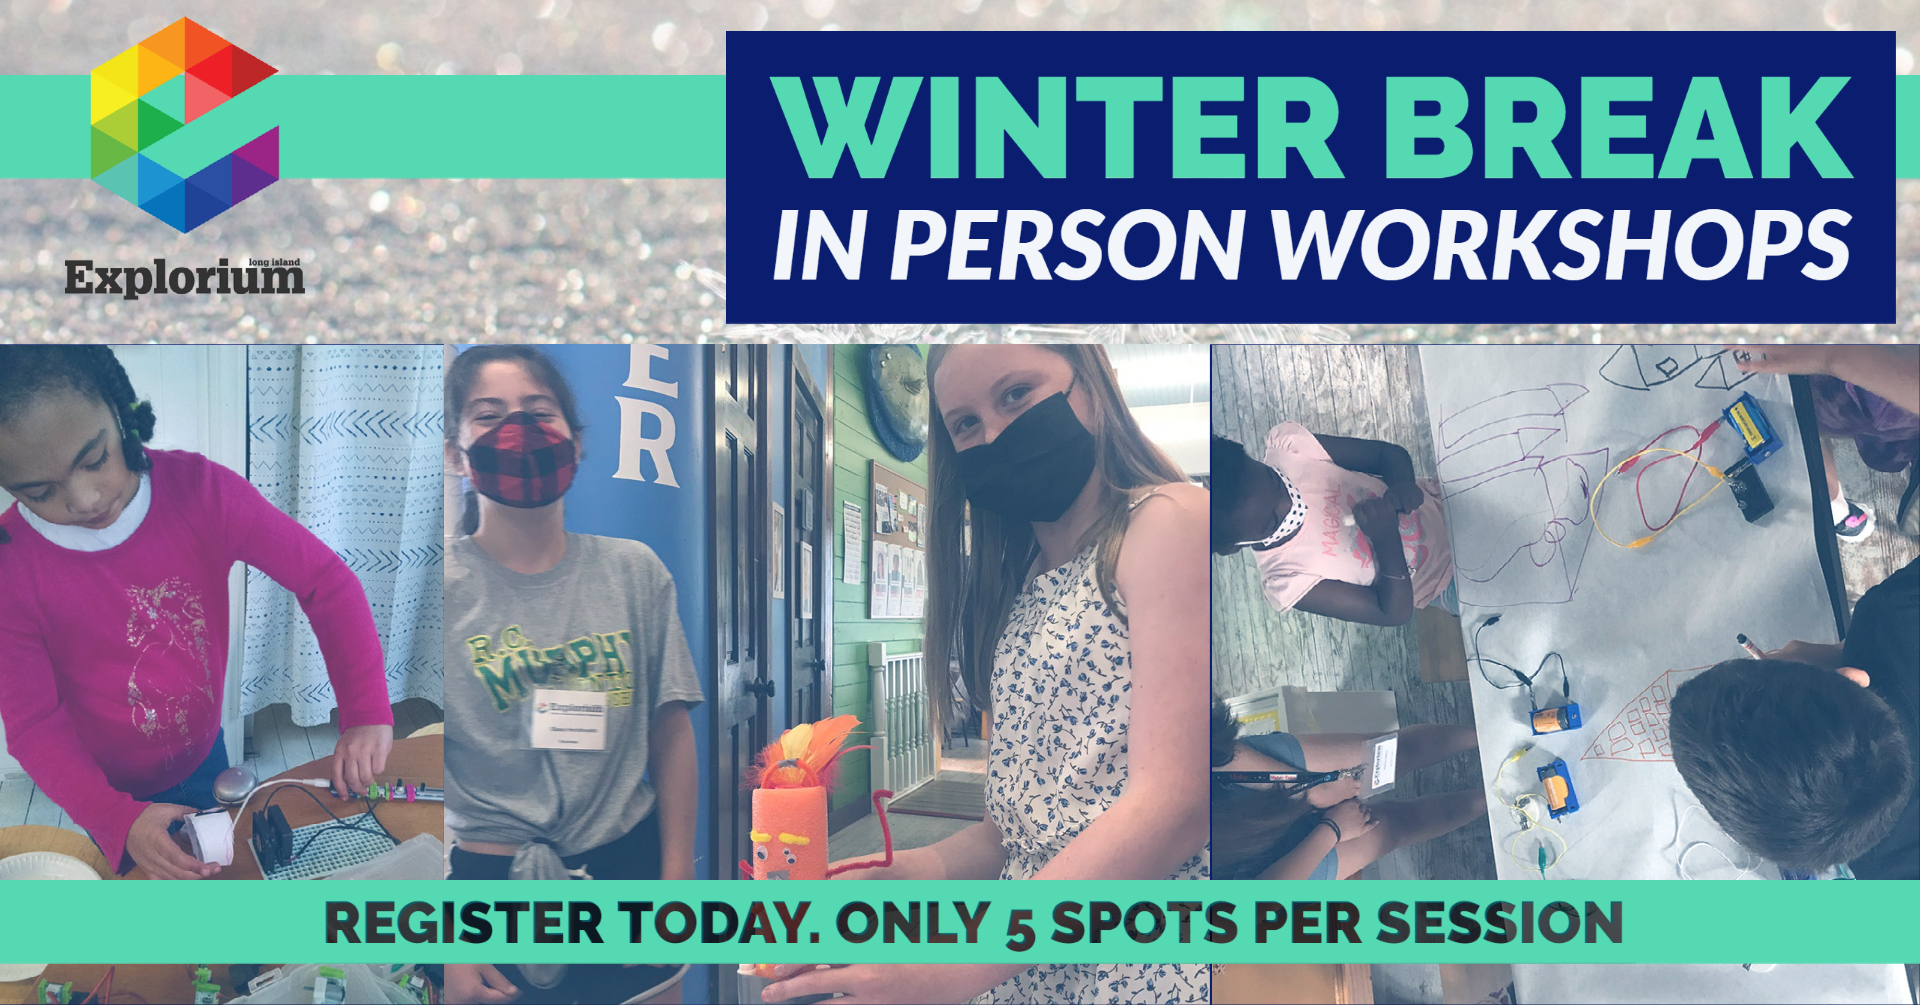 In Person winter Break workshops 2022 - events page